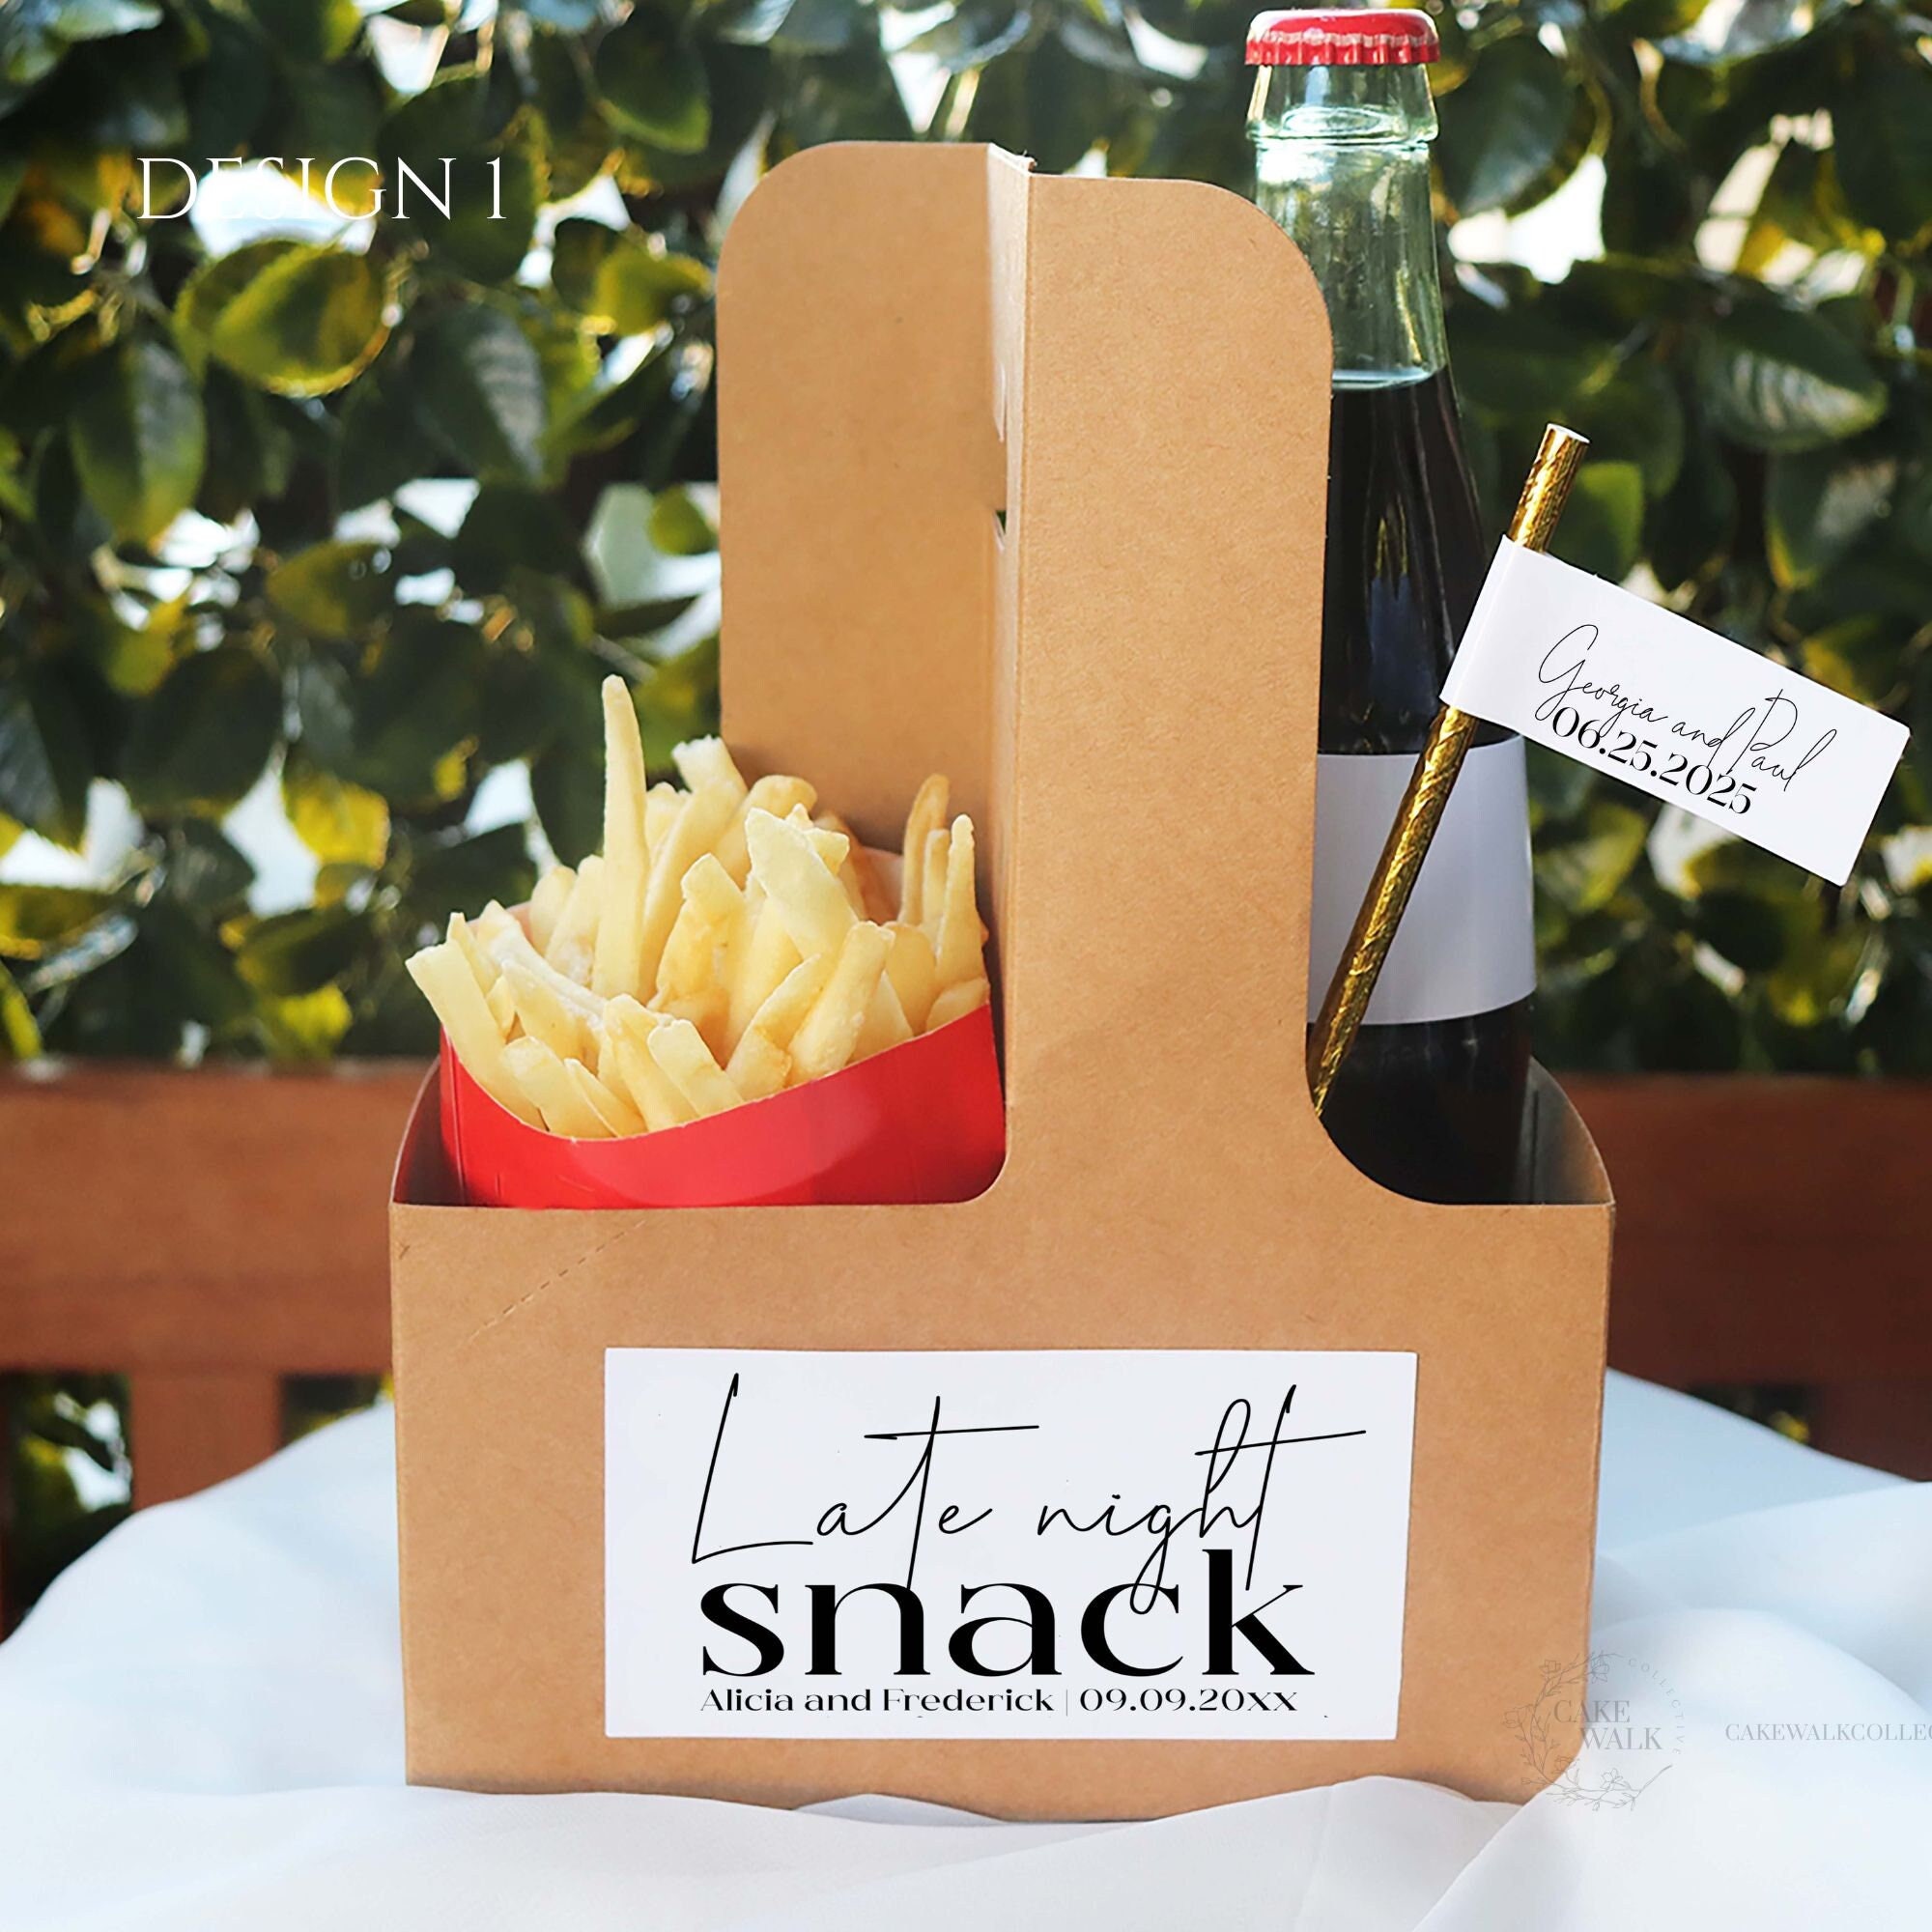 Take-out Paper Cone 50pcs French Fries Snacks Storage Bags Kraft Paper Bag  French Fries Holders 